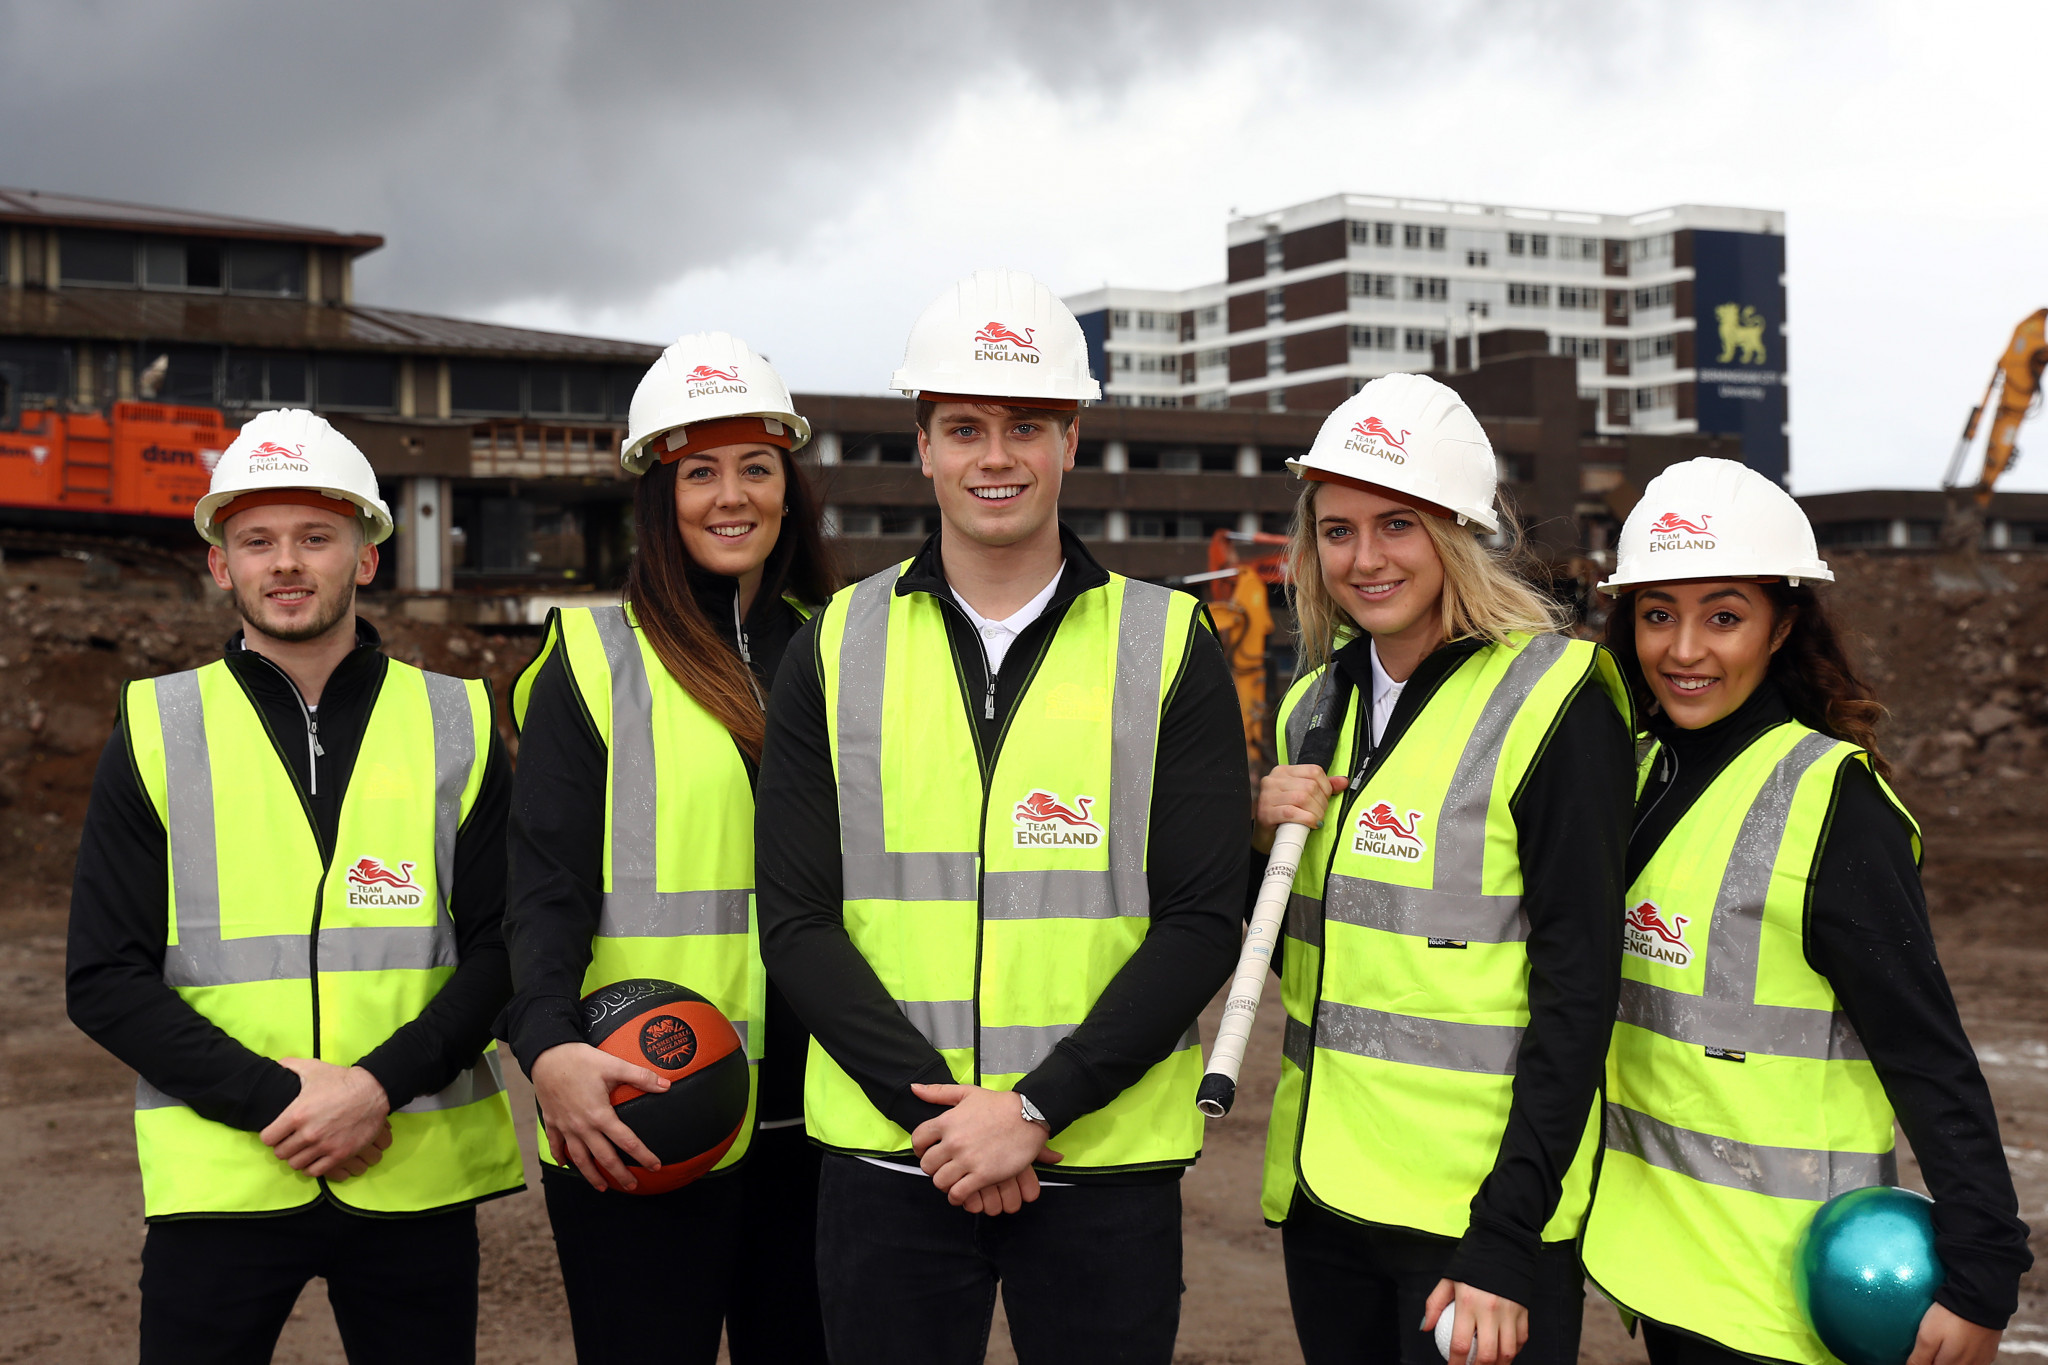 Team England athletes Dominick Cunningham (gymnast), Siobhan Prior (basketball) Tom Hamer (swimmer), Lily Owsley (hockey) and Mimi Cesar (gymnast) at the proposed site for the 2022 Commonwealth Games Athletes' Village ©Getty Images